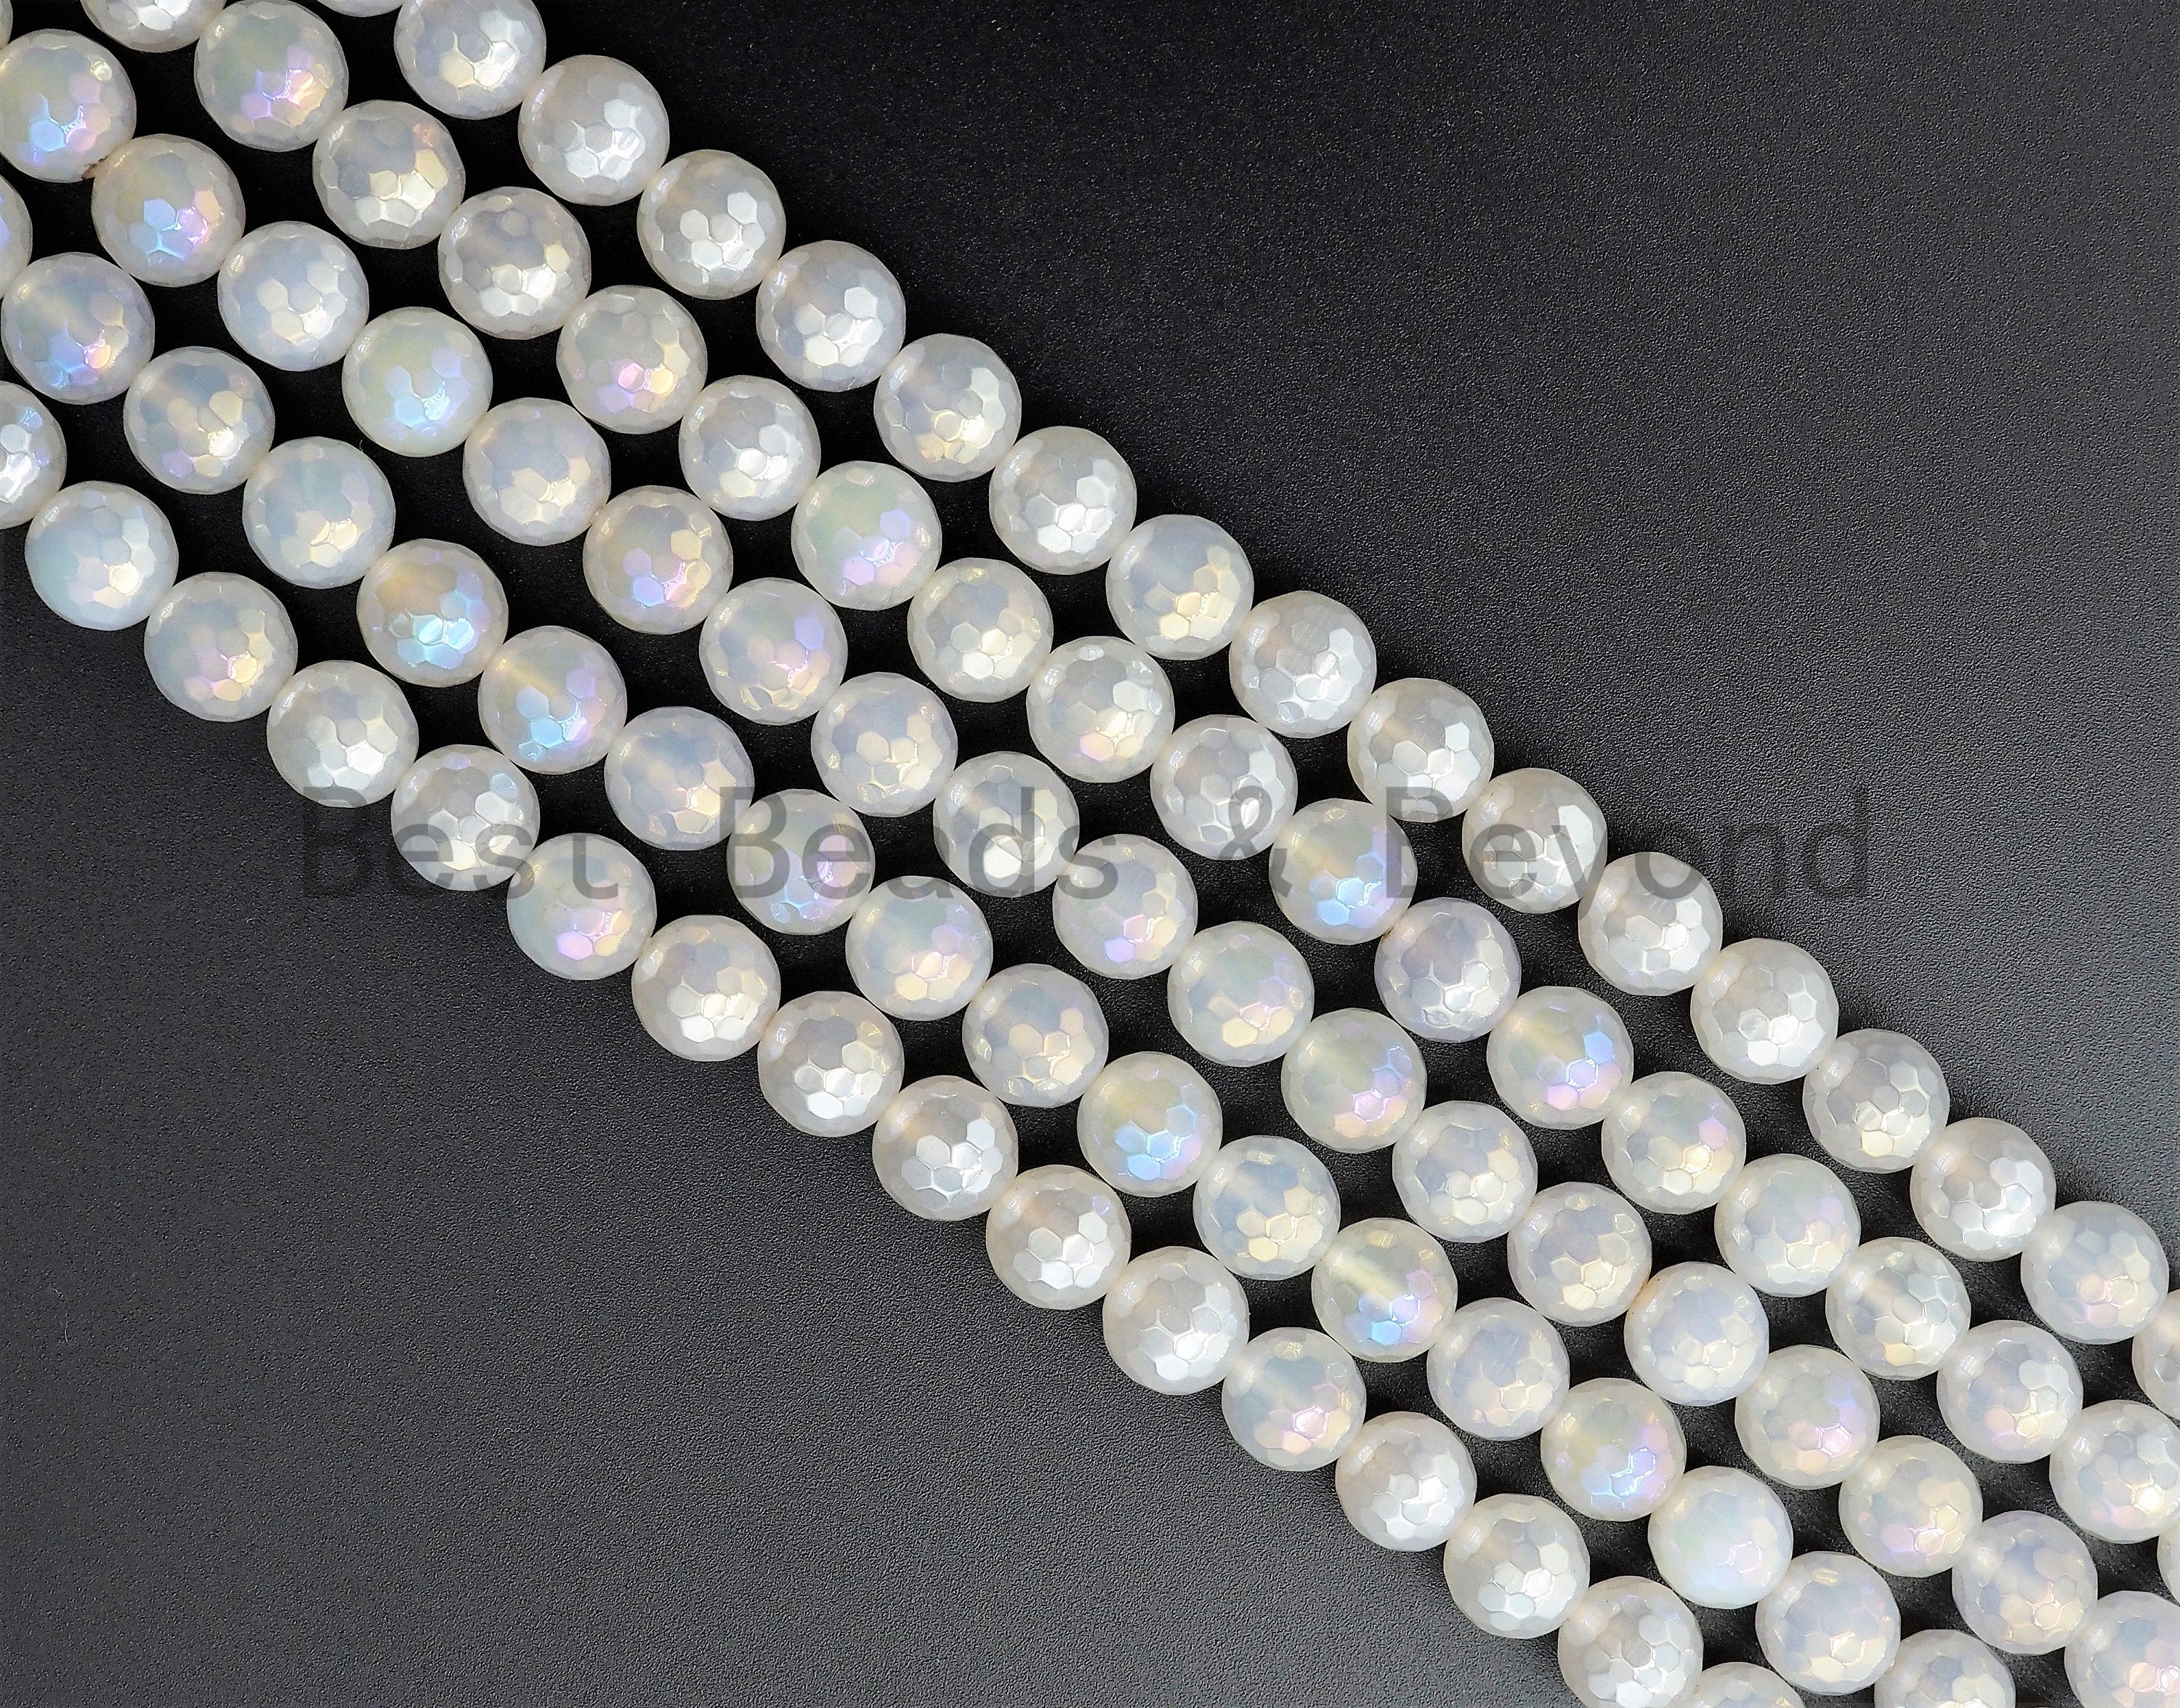 Mystic Plated Agate beads, 6mm/8mm/10mm/12mm Faceted Round Gemstone beads, AB Color Rainbow White Agate Beads, 15.5inch strand, SKU#U345 BestbeadsbeyondUS